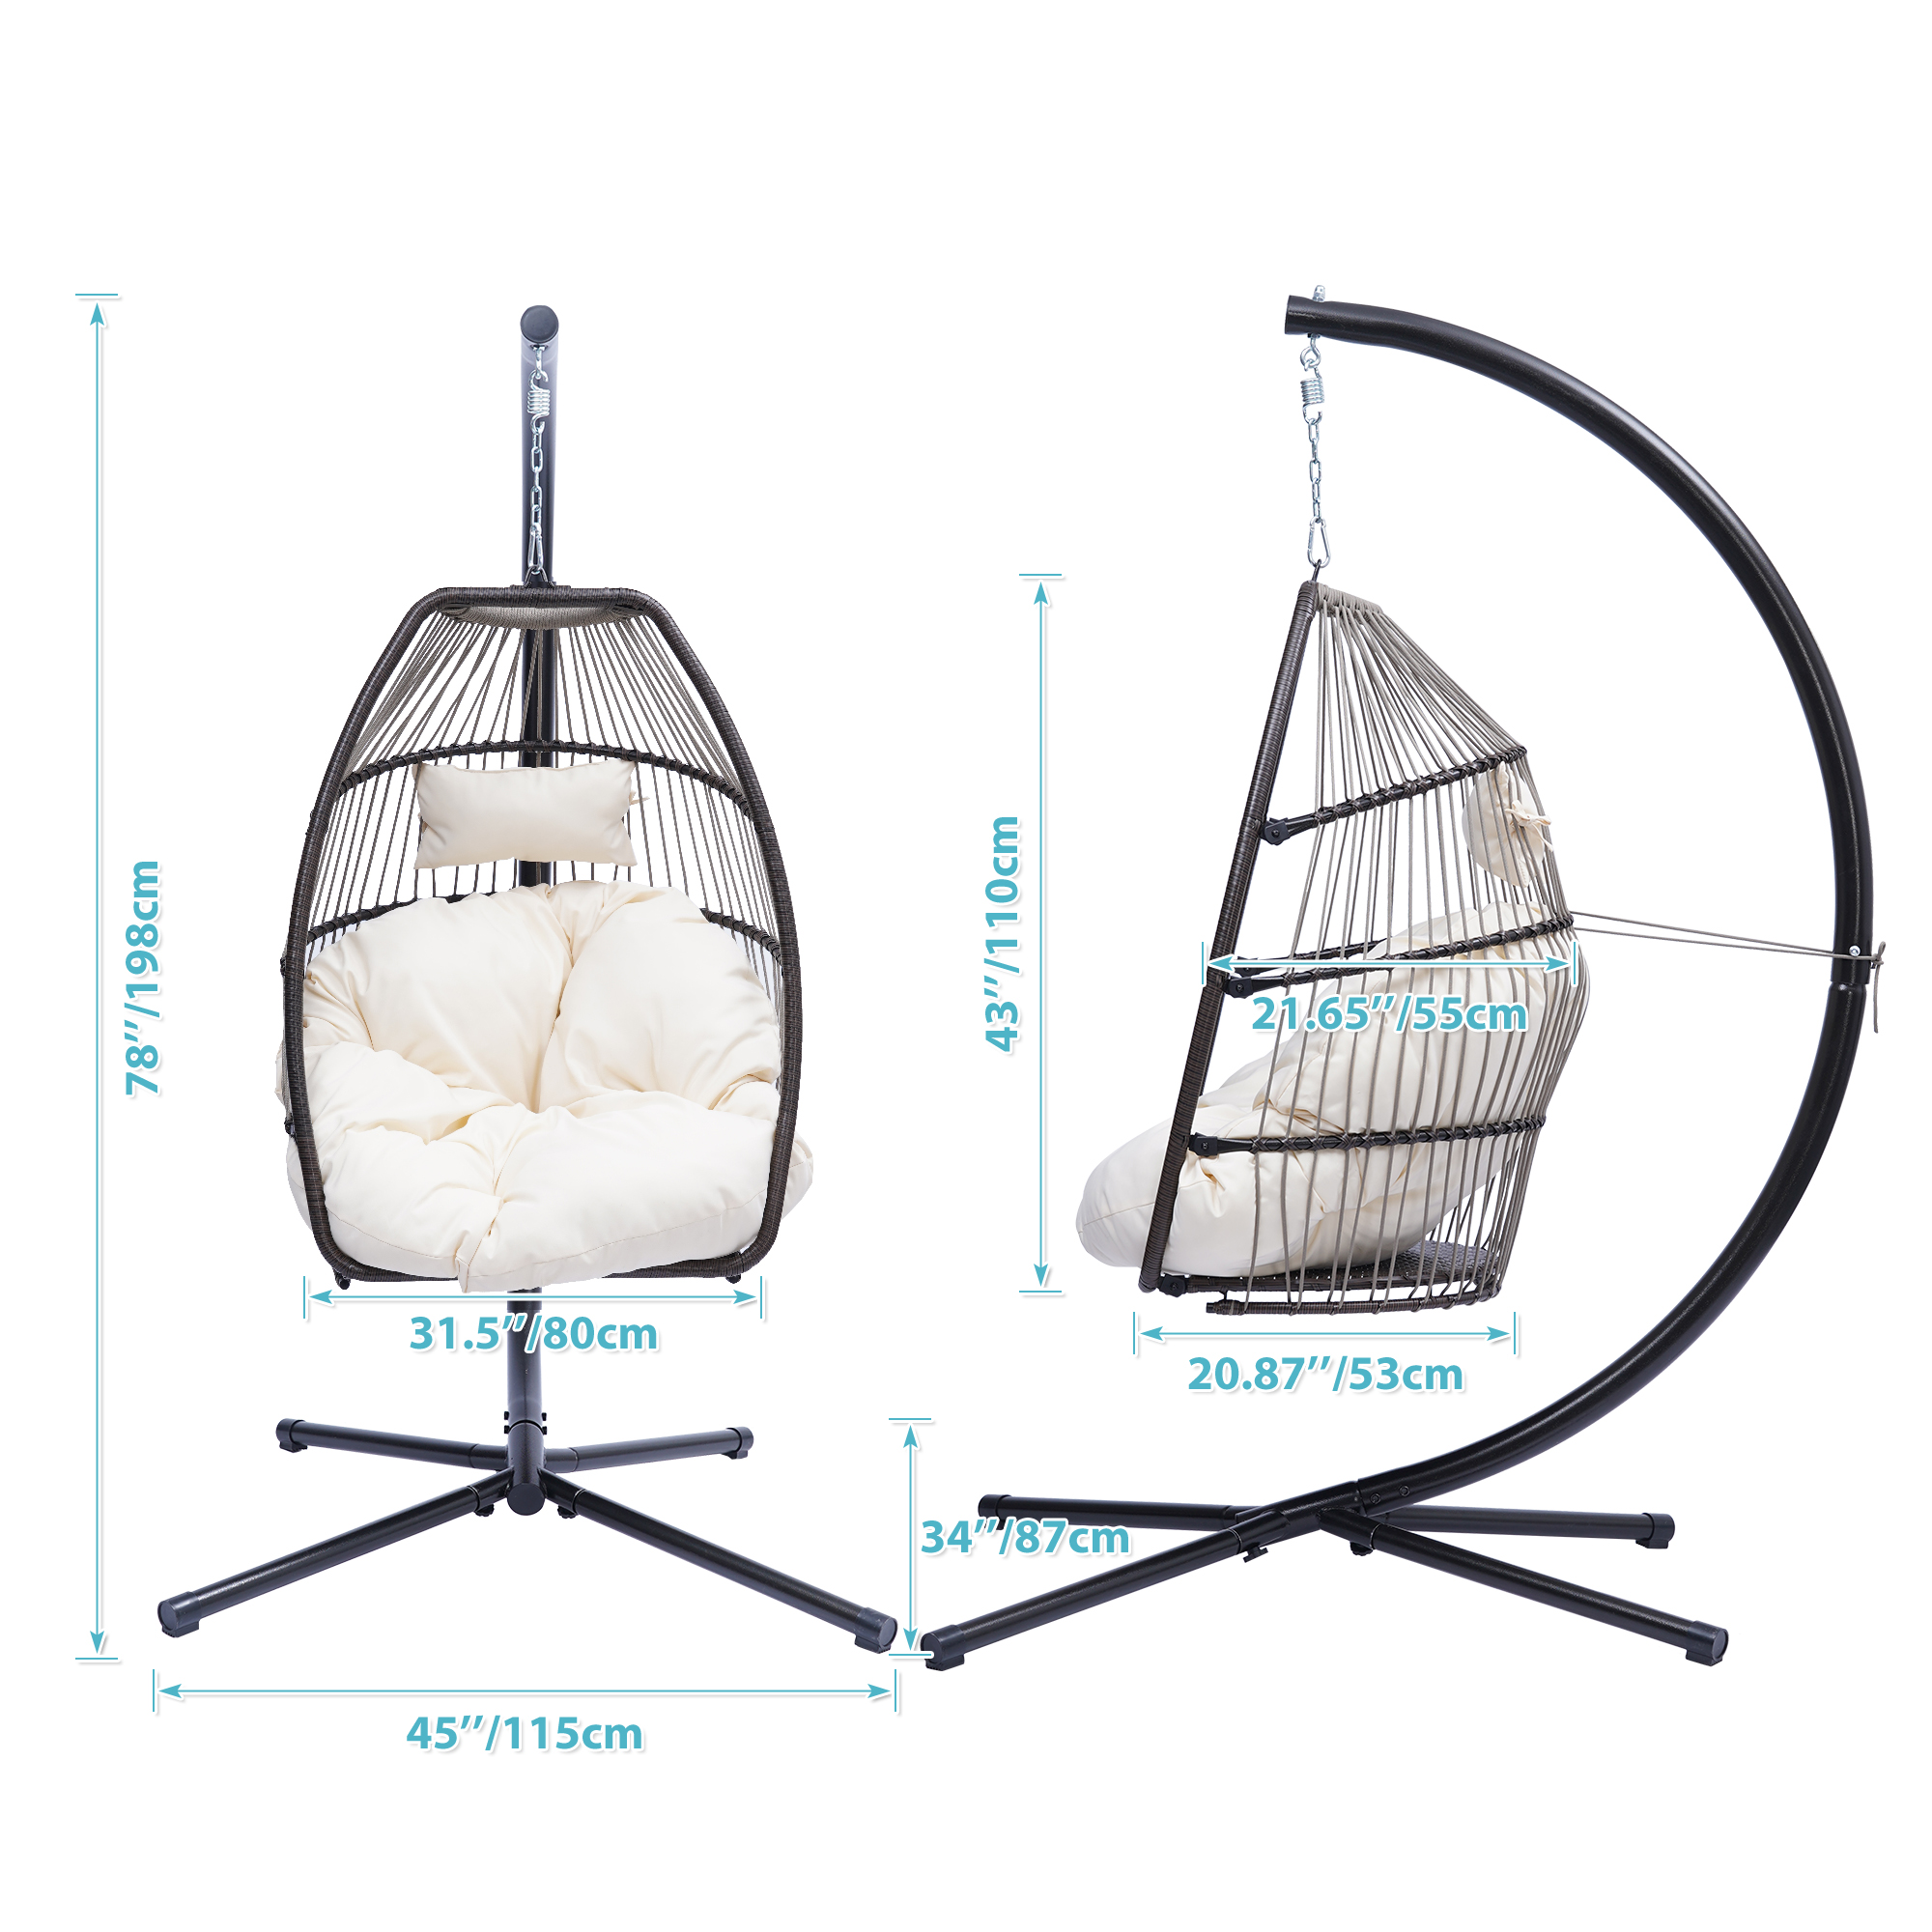 Outdoor Patio Furniture, Hanging Egg Chair with Stand, Rattan Wicker Egg Hammock Chair with Hanging Kits, Swinging Egg Chair for Indoor, Bedroom, Patio, Garden, Balcony, Beige Cushion, W11034 - image 5 of 6